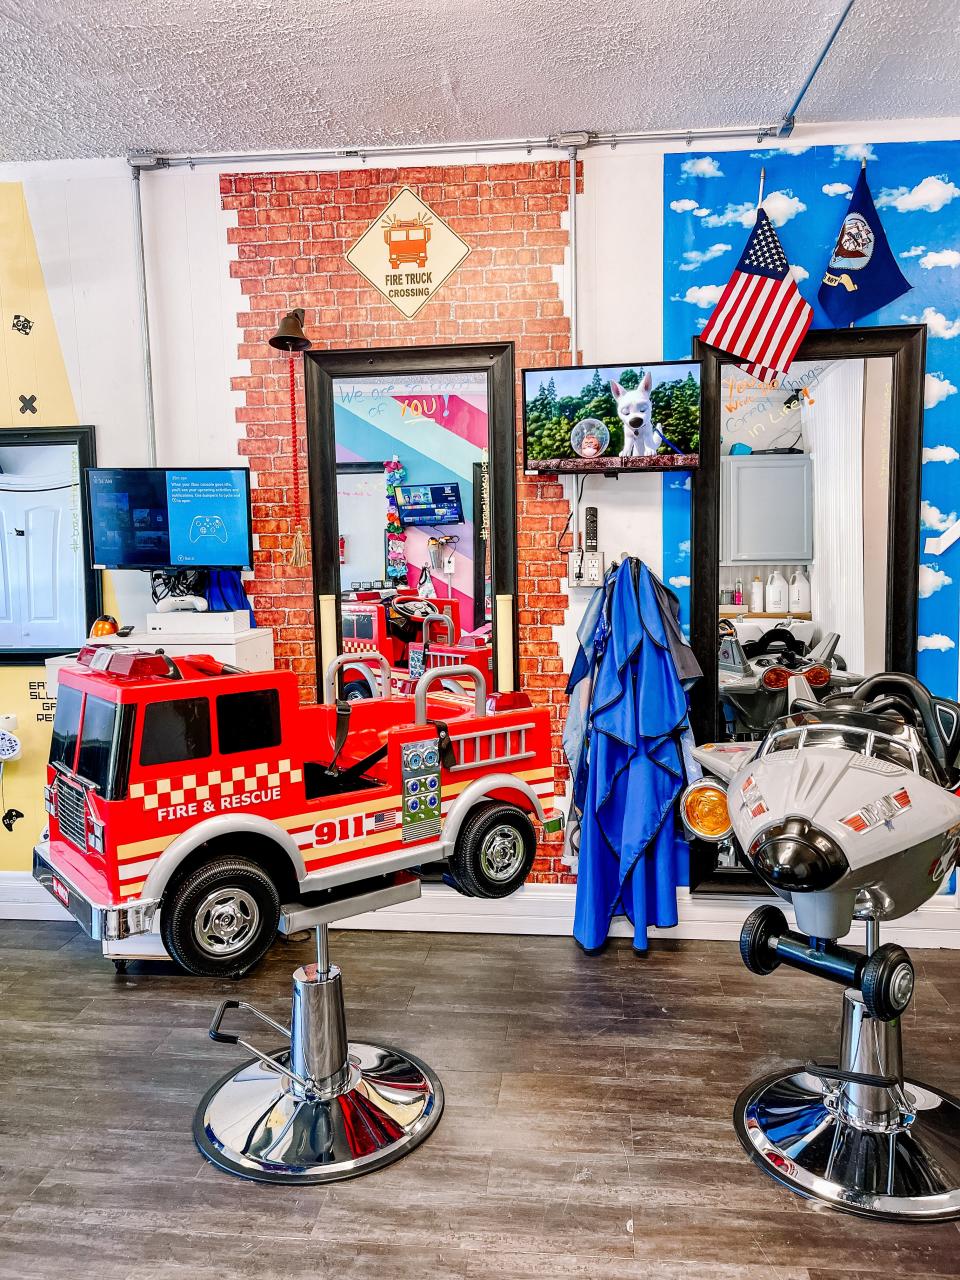 A fire truck and fighter jet are just two of the vehicles children can sit in at Brave Little Clippers in Fountain City on Aug. 3, 2022.